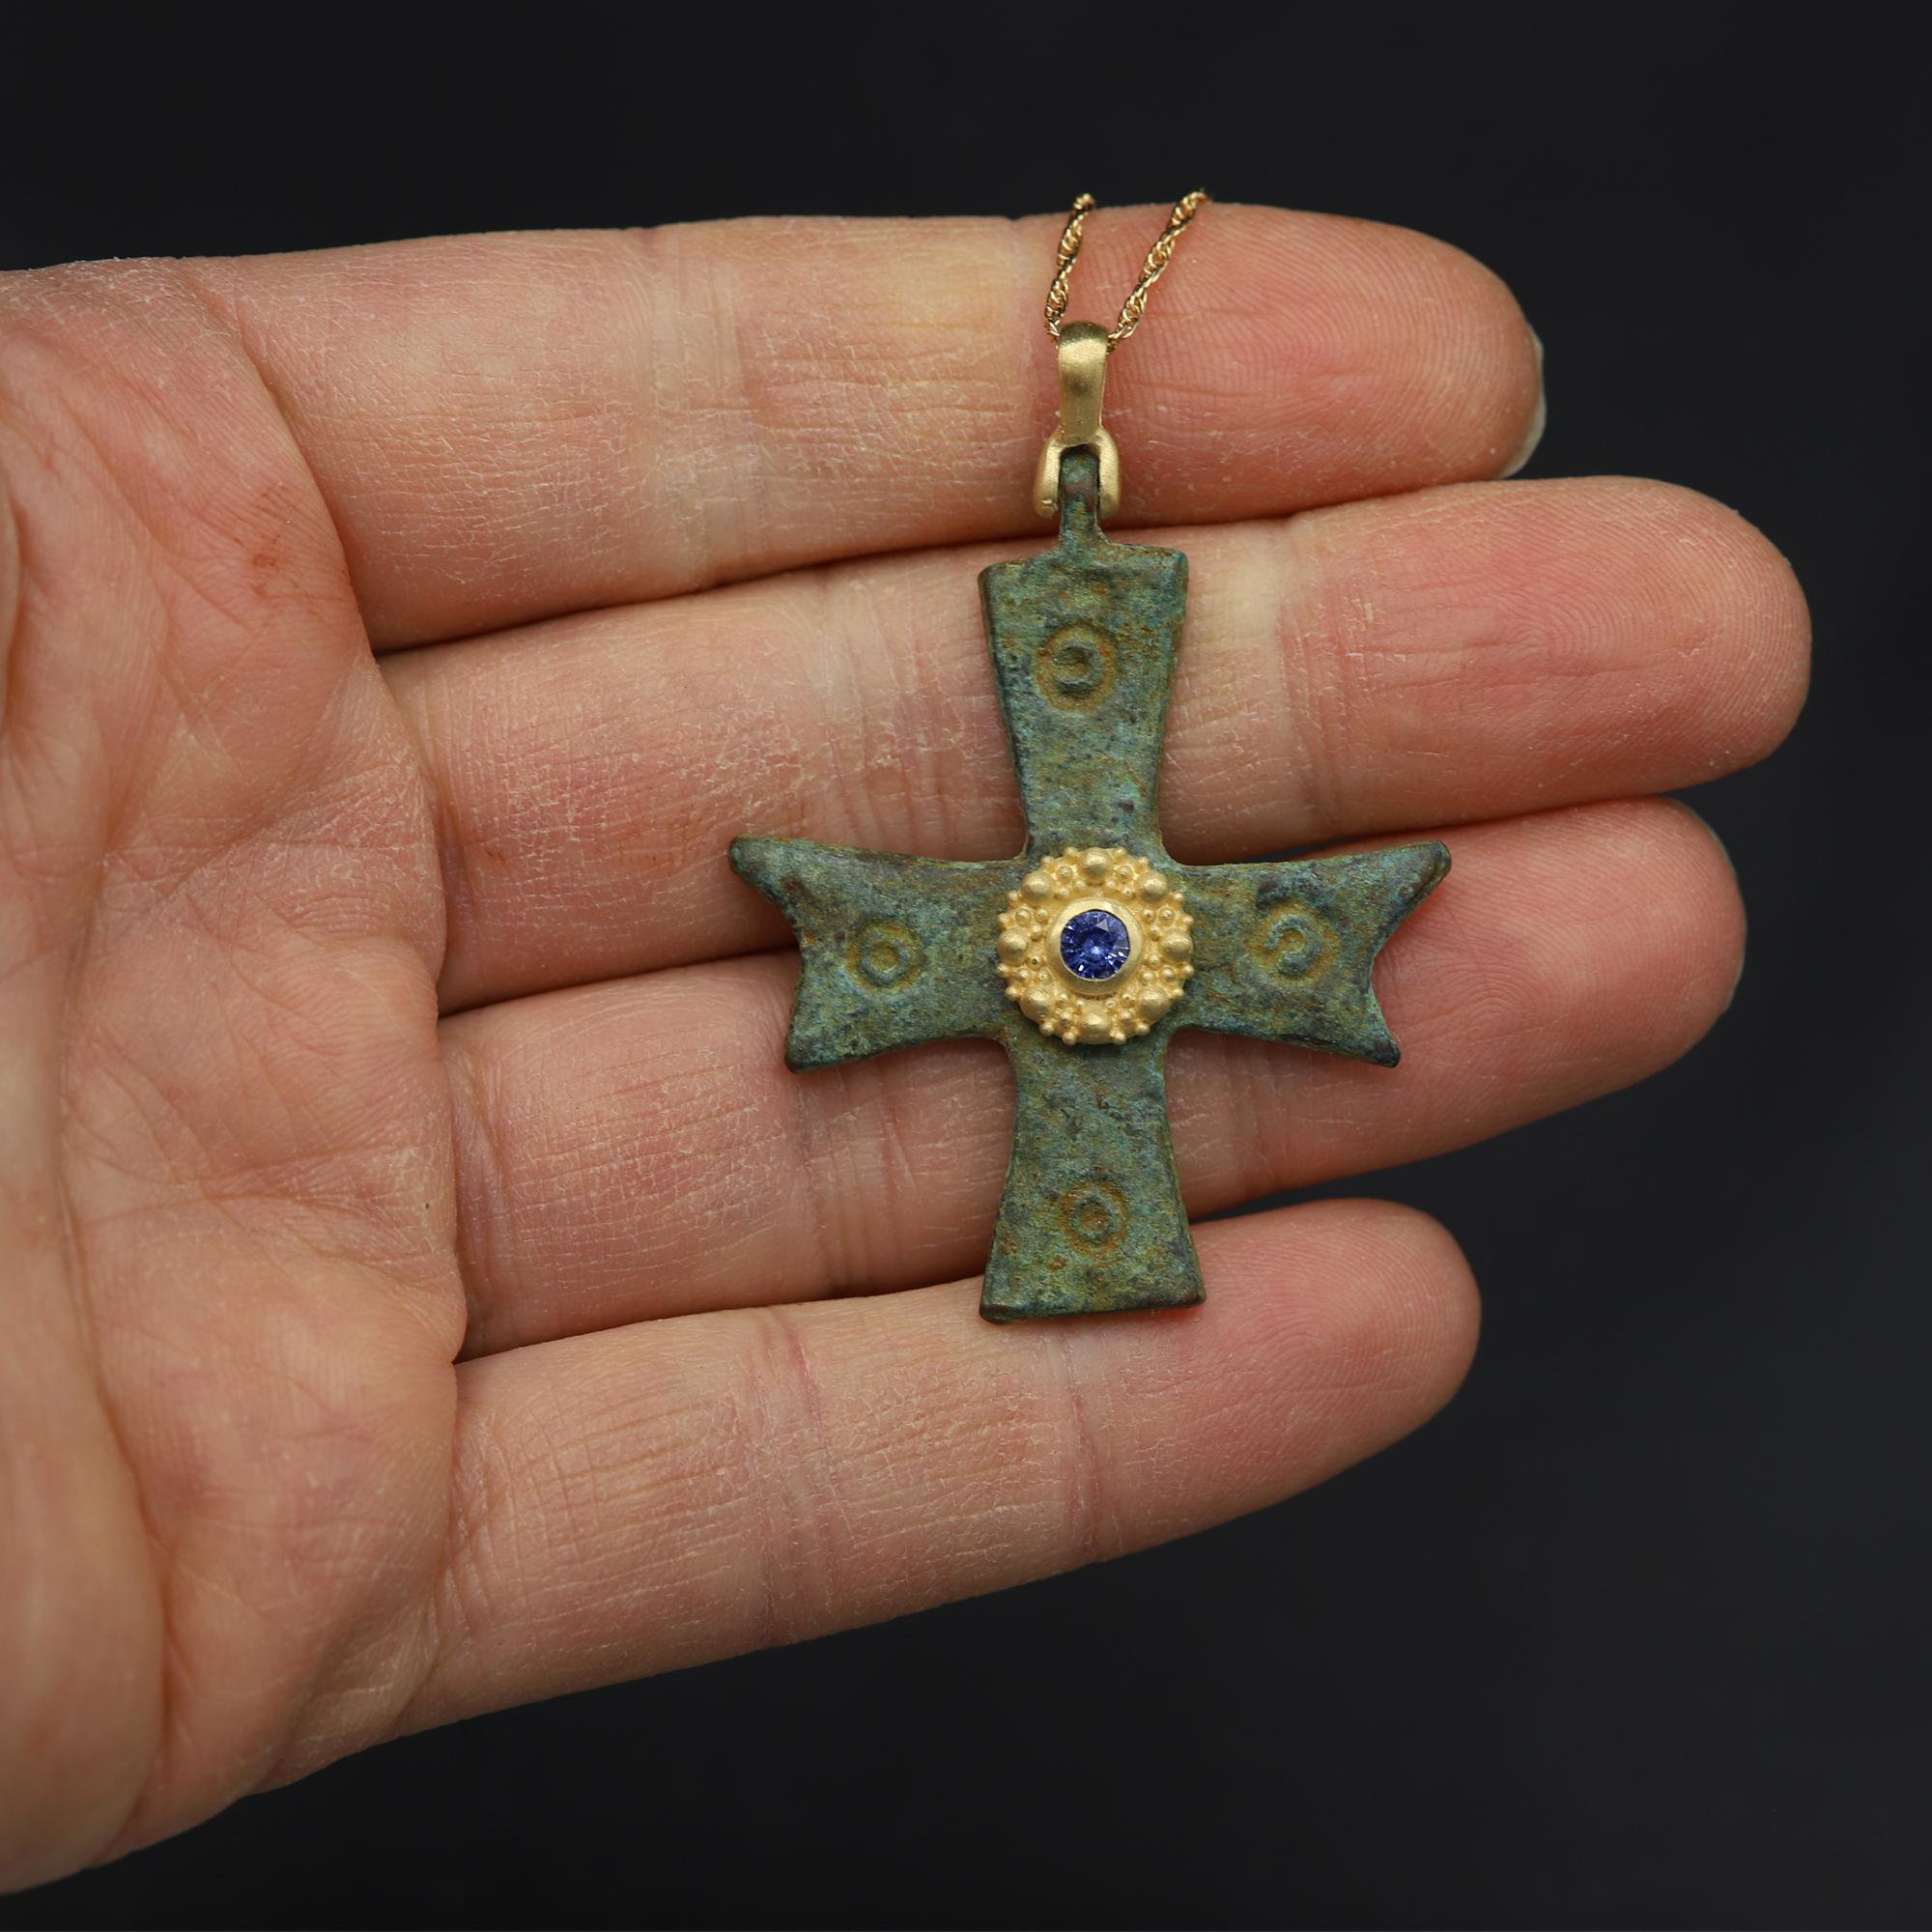 Magnificent piece of History - can be yours today !
Ancient Byzantine Period cross.
Hand set in Italy with 18k Yellow Gold & Blue Sapphire.
Approx size 1.75' inch / 40 mm.
This Antique Bronze Cross is estimated from 600-900 AD 
Included 16' - 18'